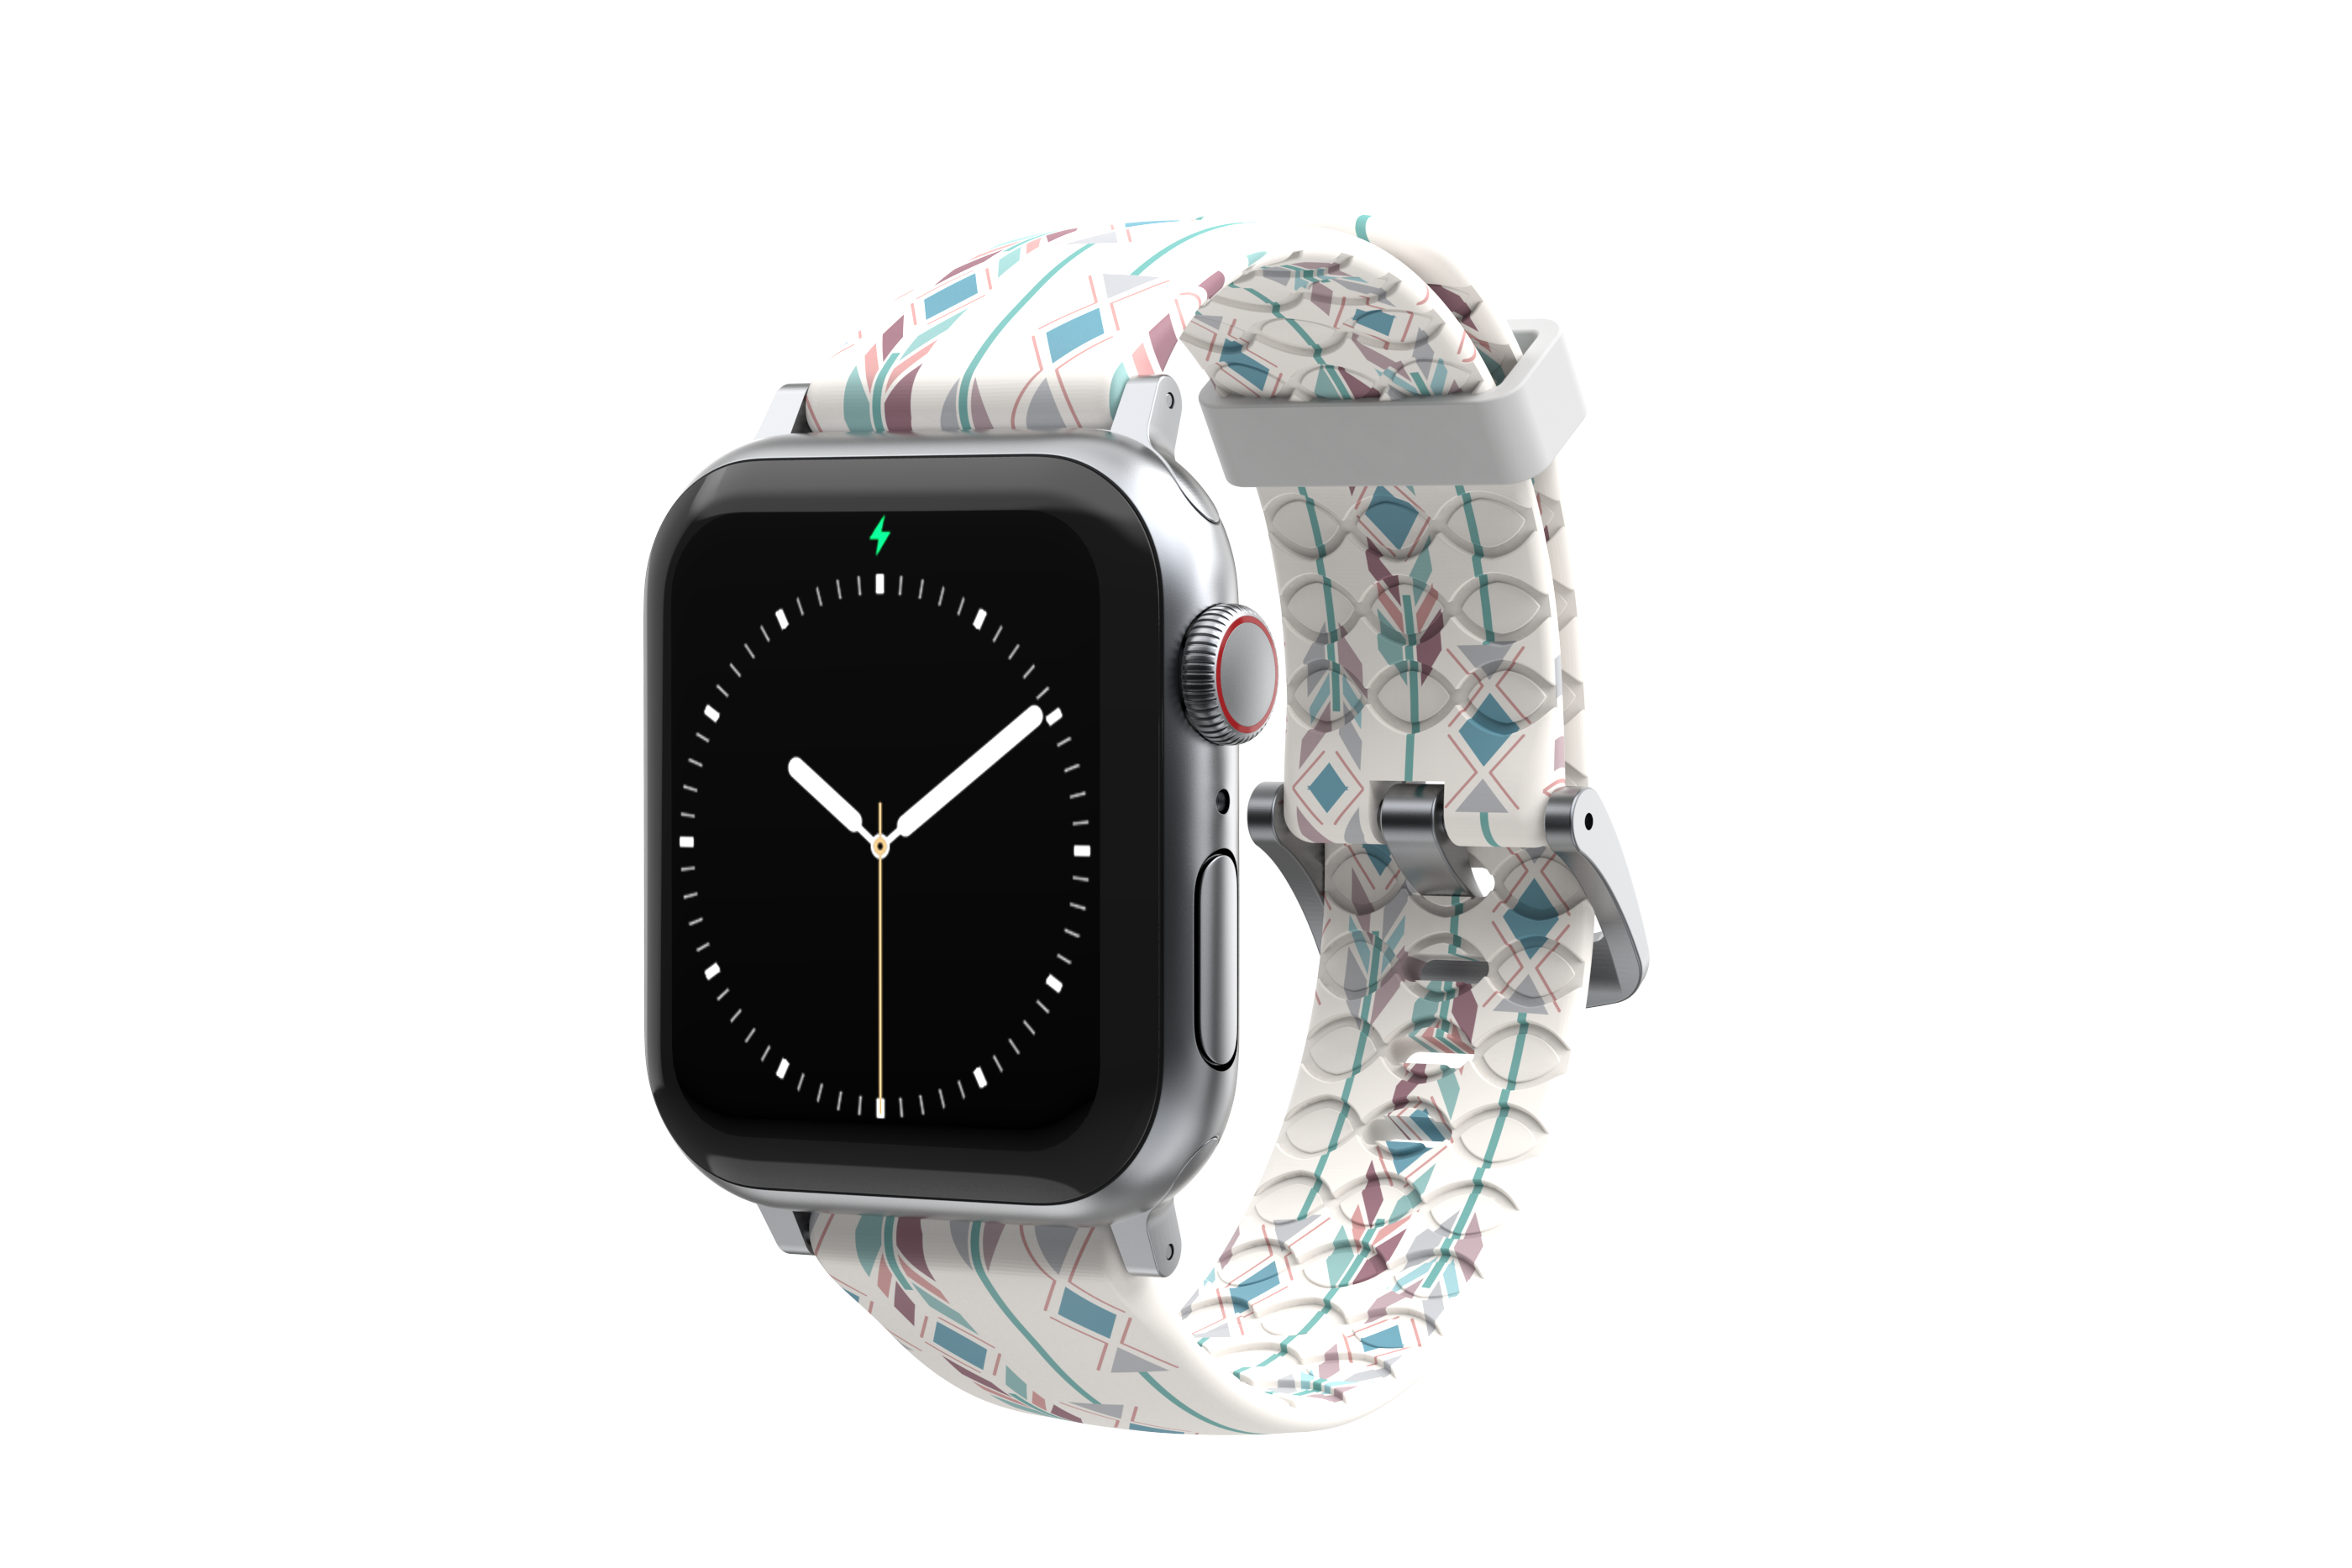 Wanderlust - Apple Watch Band with silver hardware viewed front on